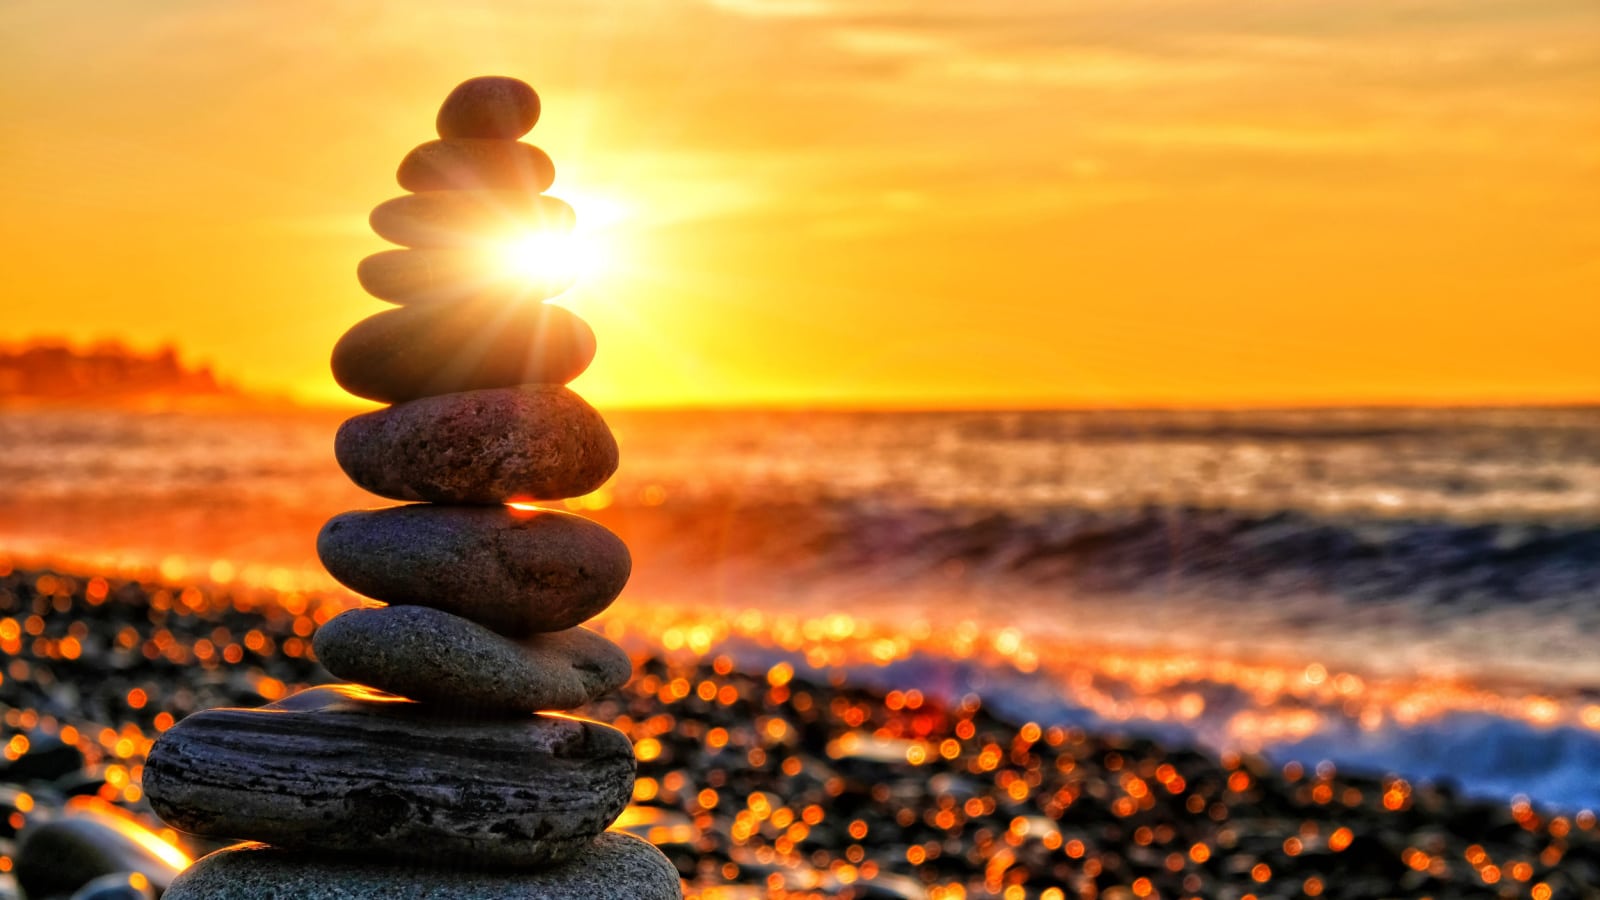 beautiful sunrise over sea beach landscape with stone figure against rising sun background. Closeup view of ocean shore at sunset with rocks. Time to collect stones scene